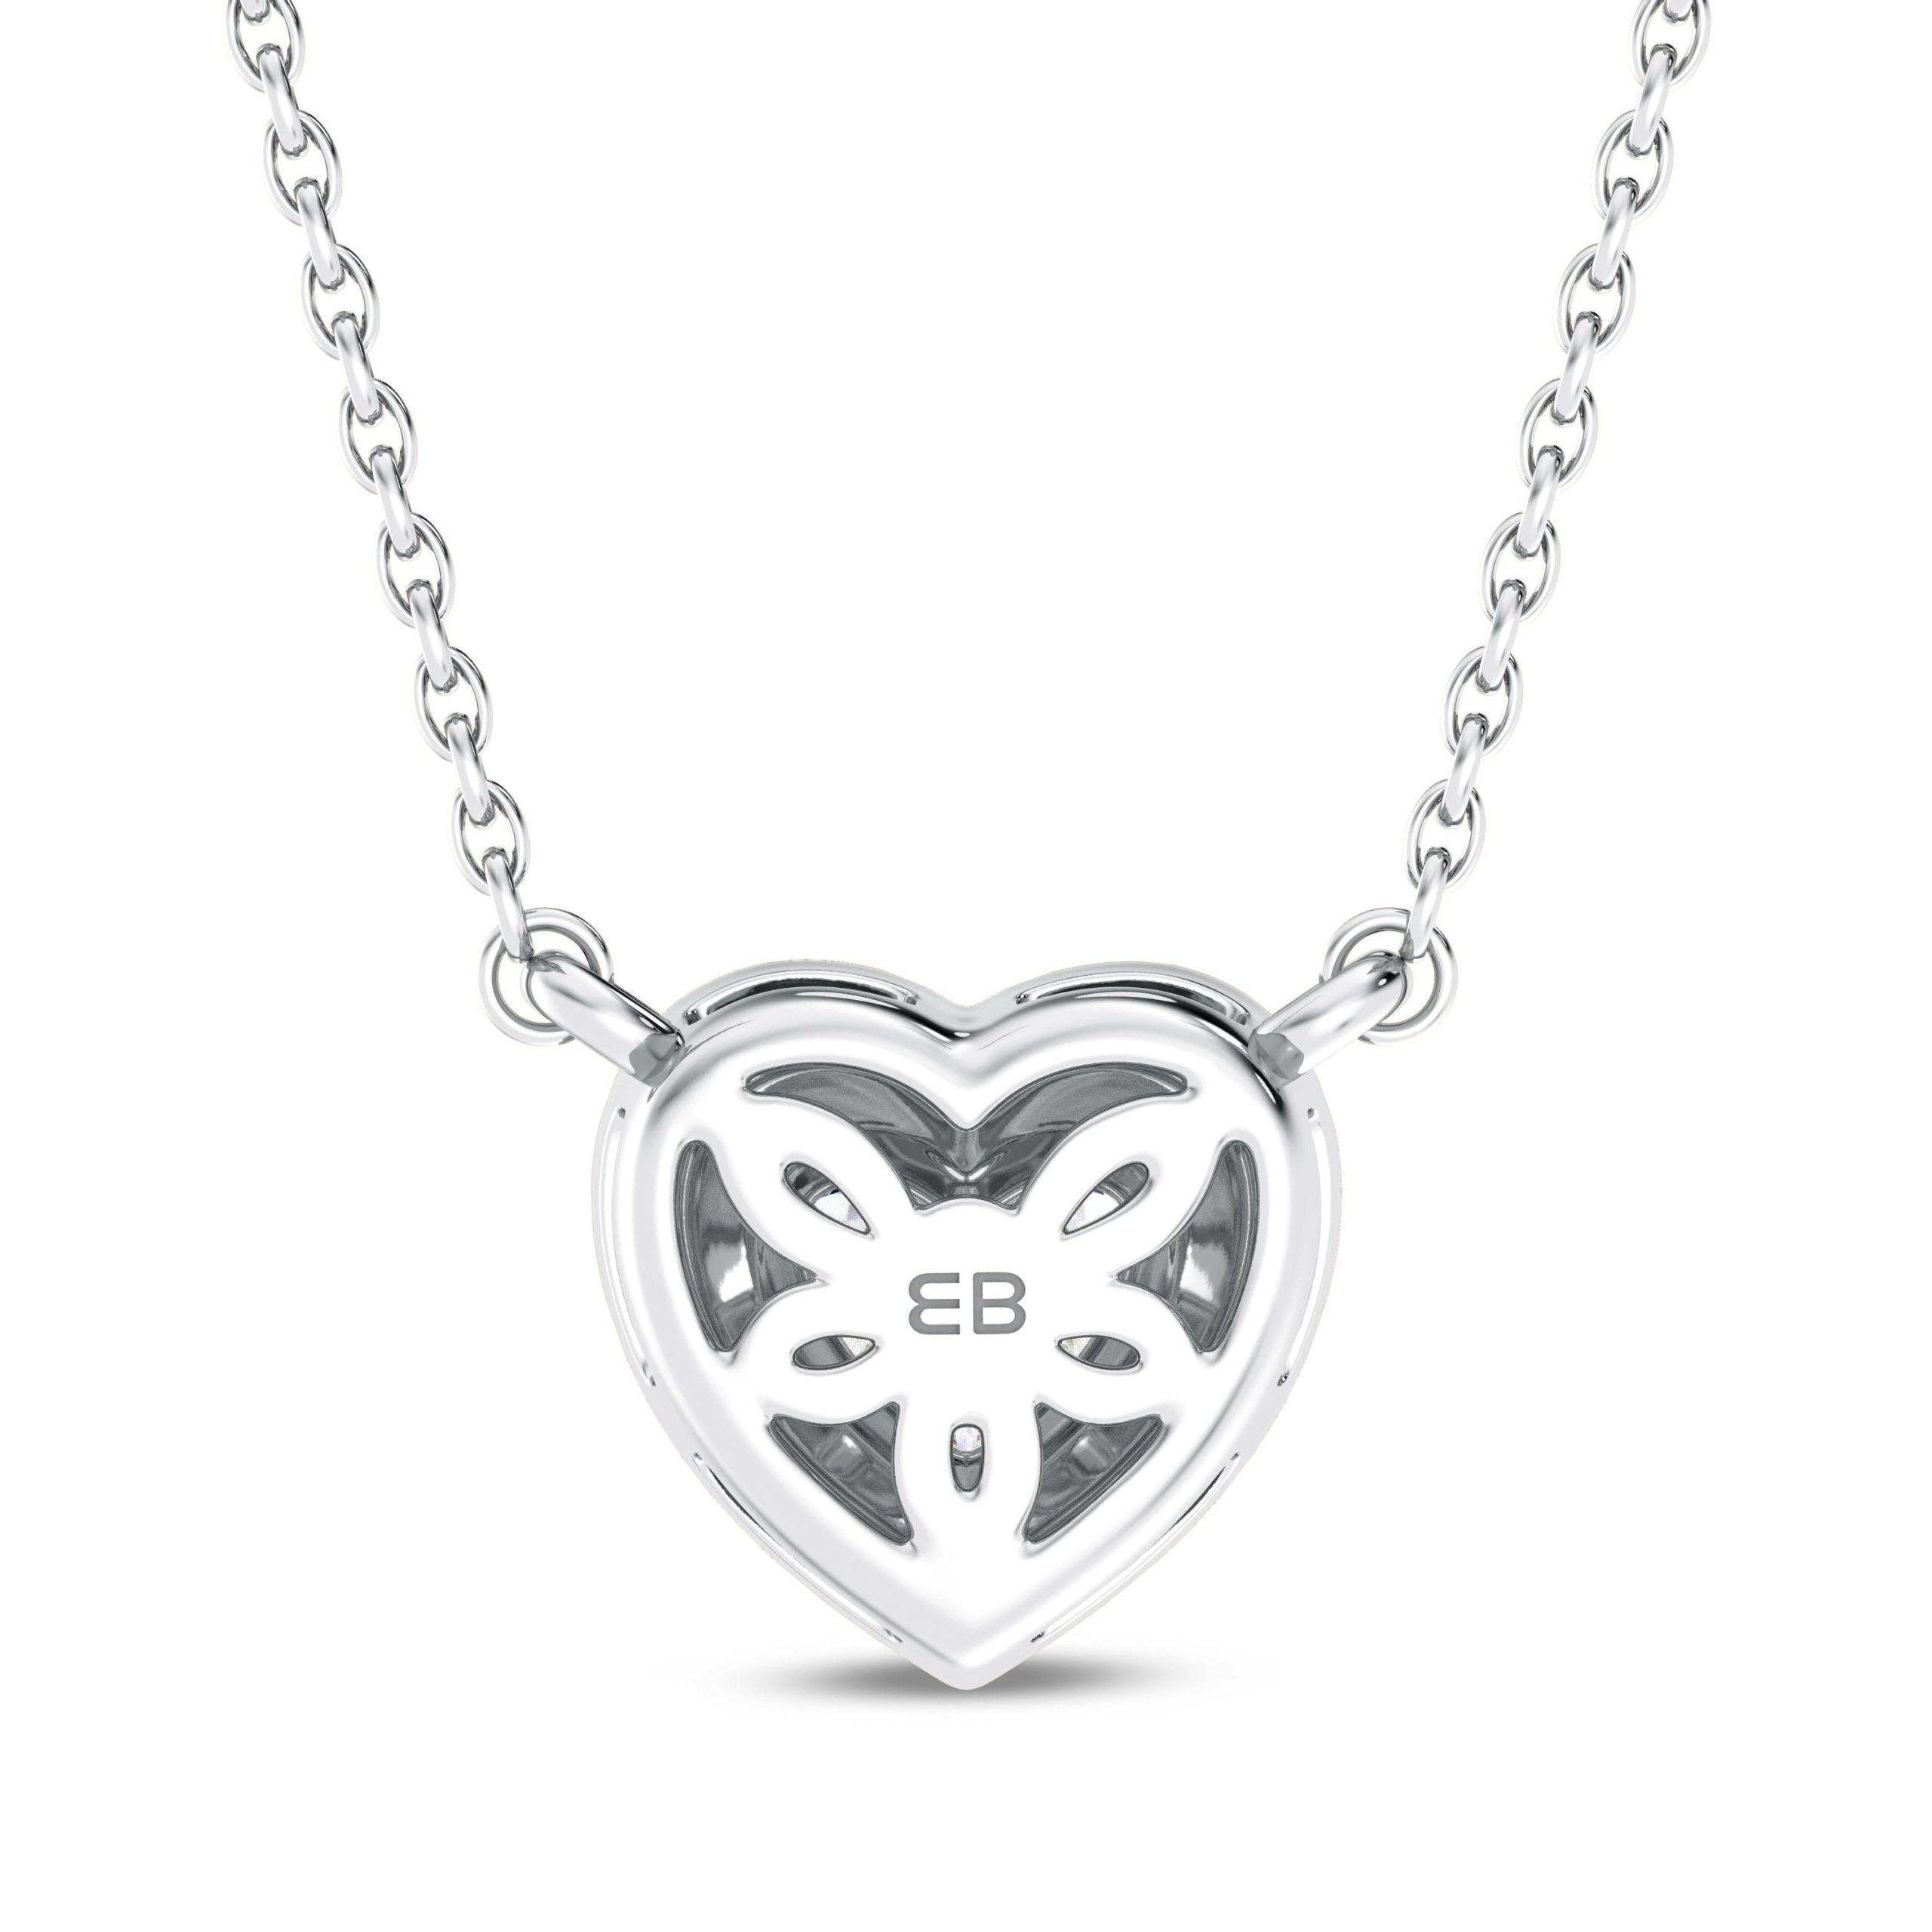 Puffed Heart Necklace - Lev | Ana Luisa | Online Jewelry Store At Prices  You'll Love